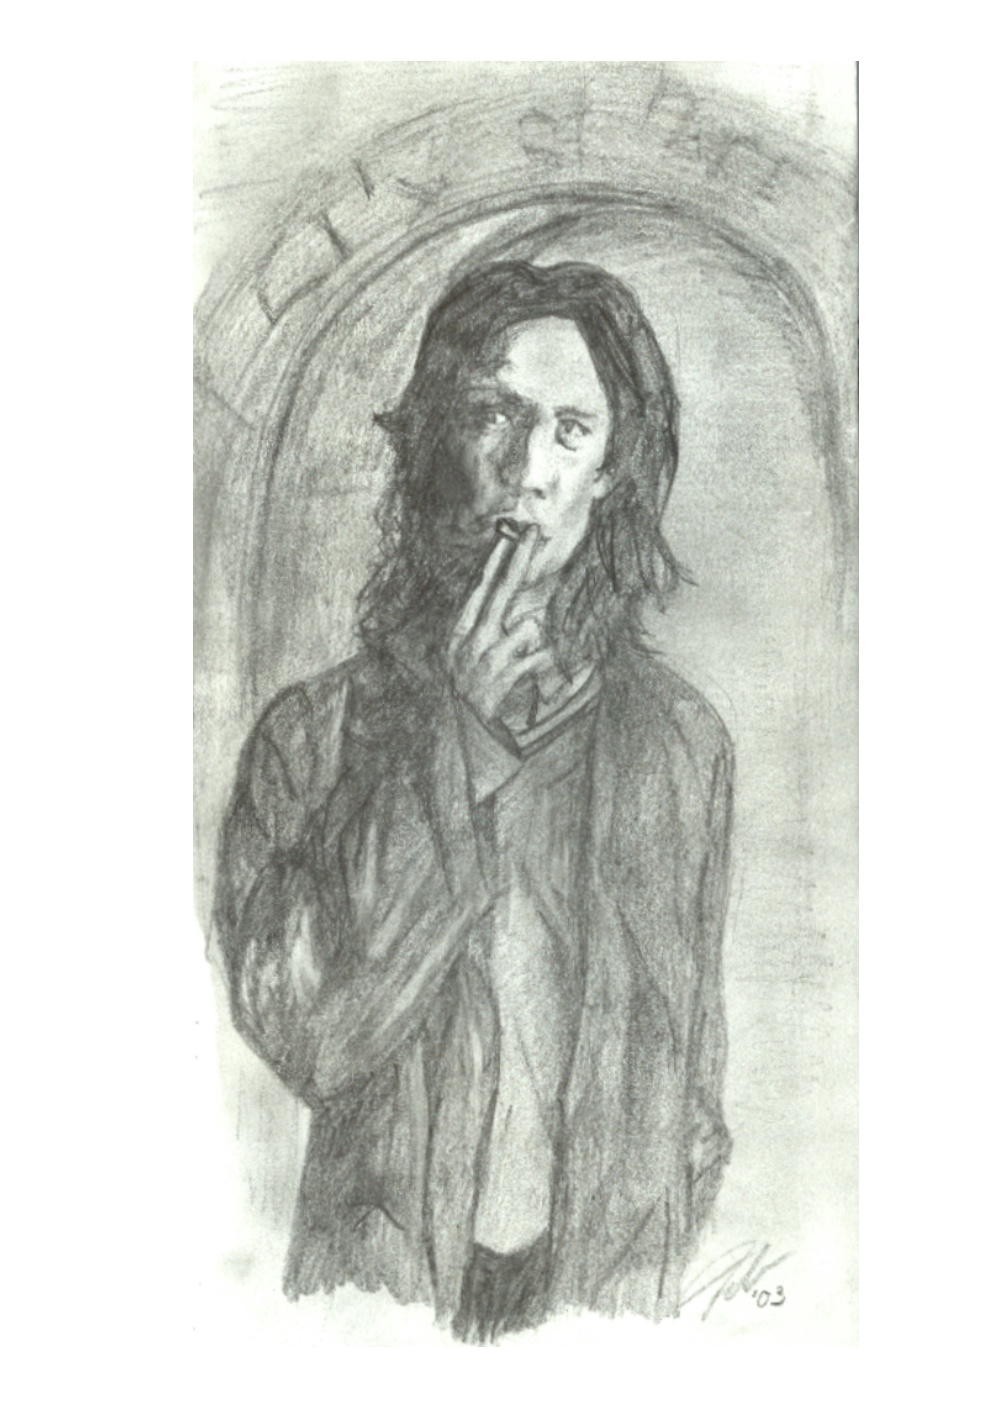 Young Snape smoking a cigarette by sympathex